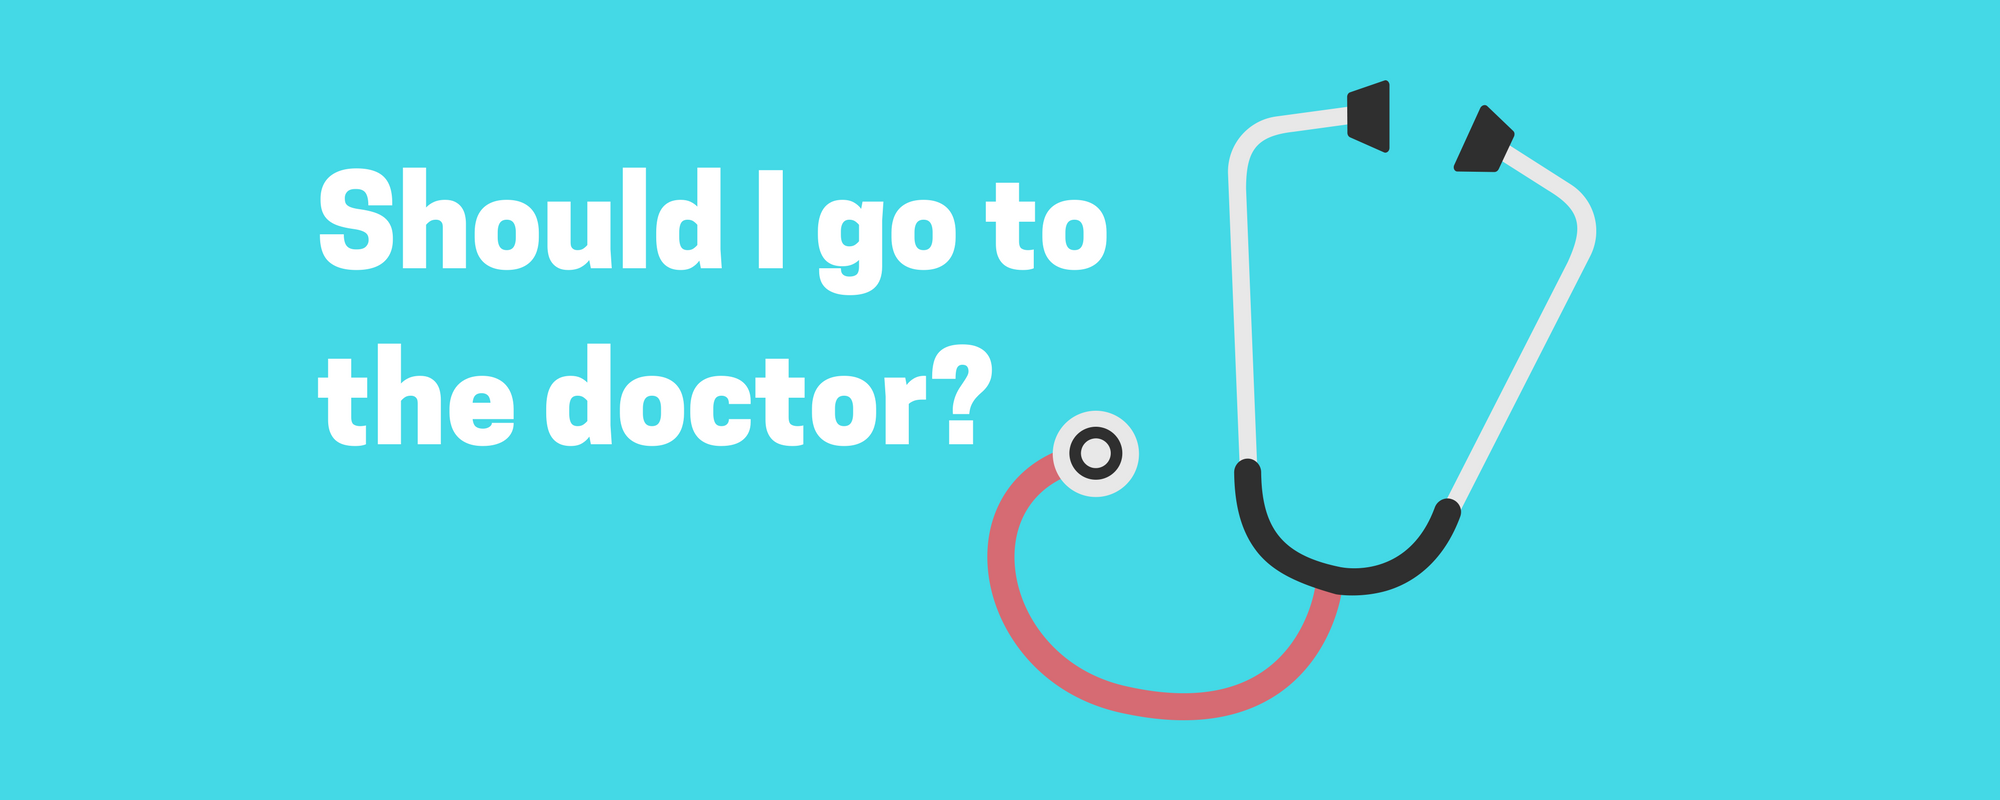 Should I go to the doctor about anxiety?